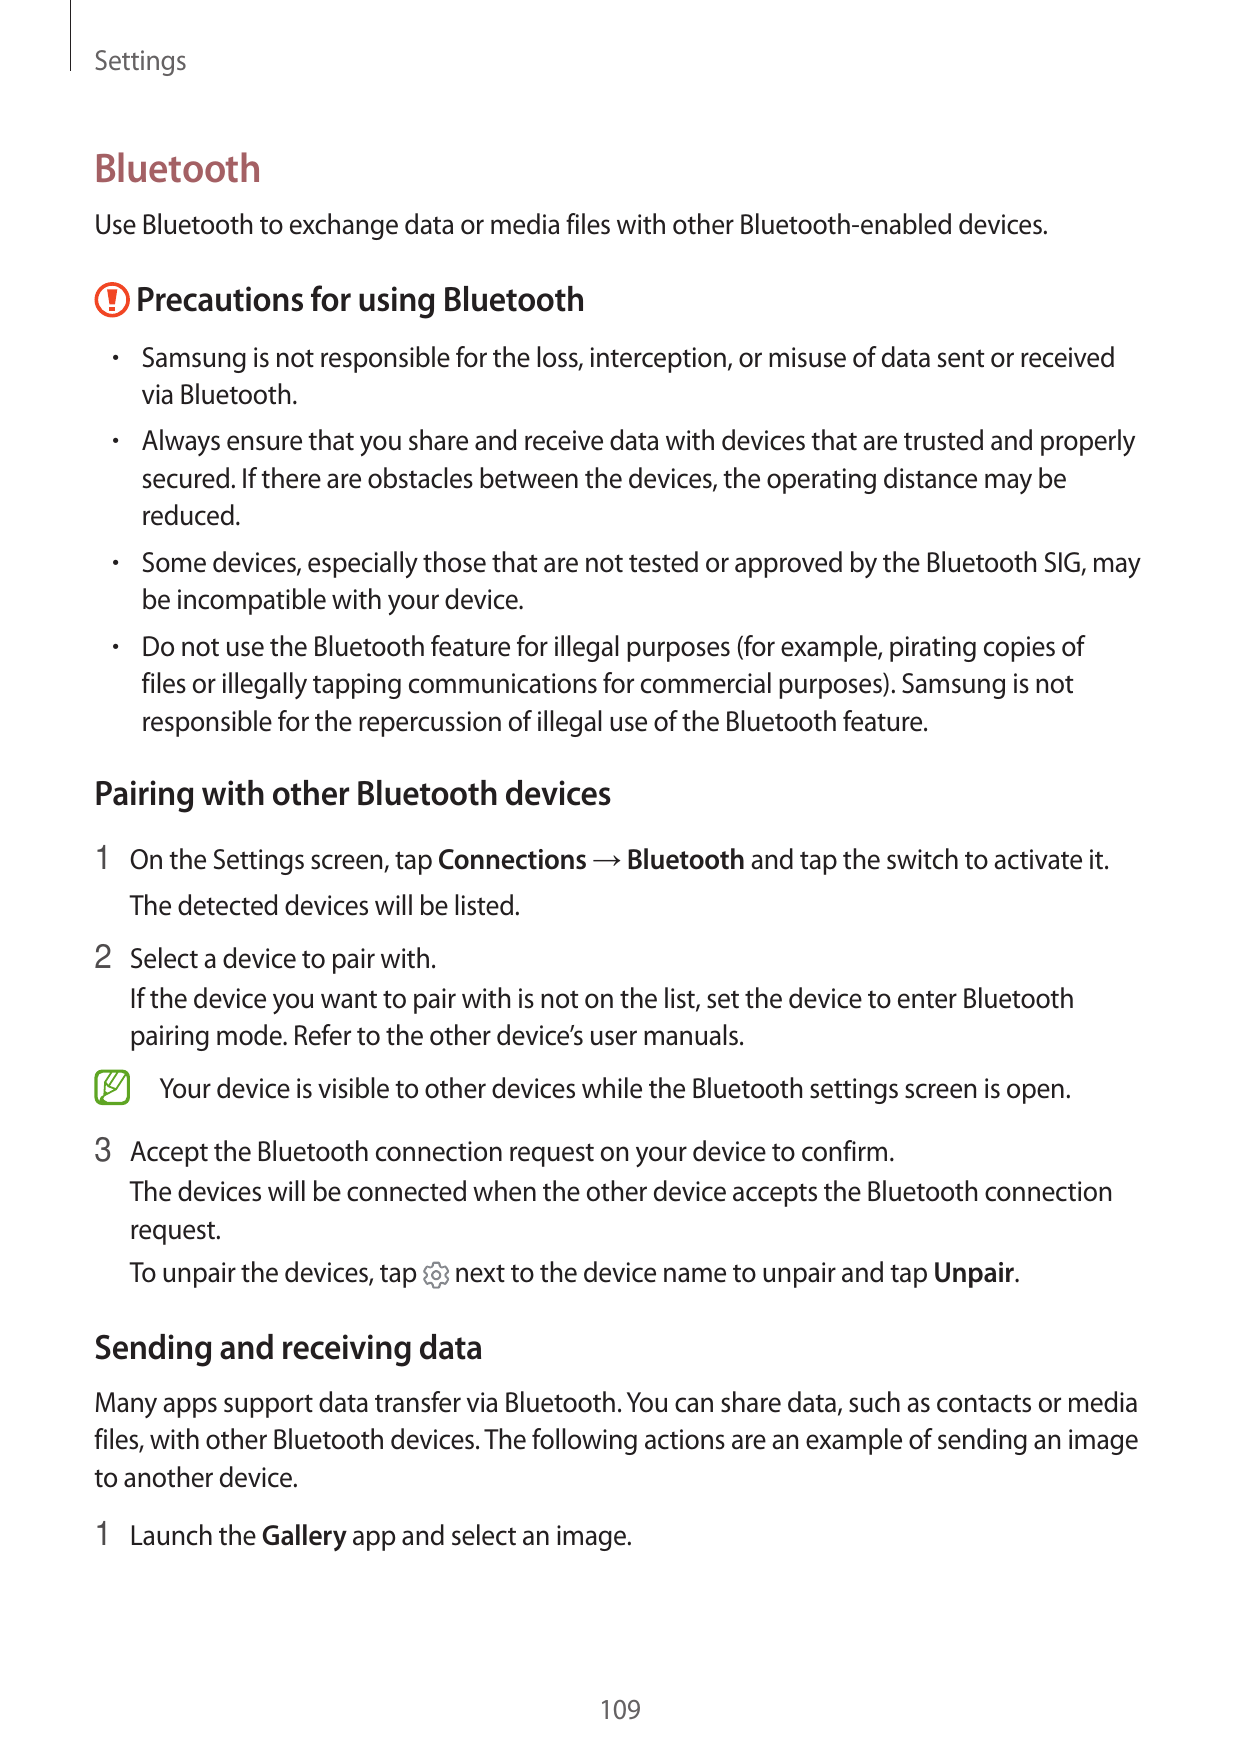 SettingsBluetoothUse Bluetooth to exchange data or media files with other Bluetooth-enabled devices.Precautions for using Blueto